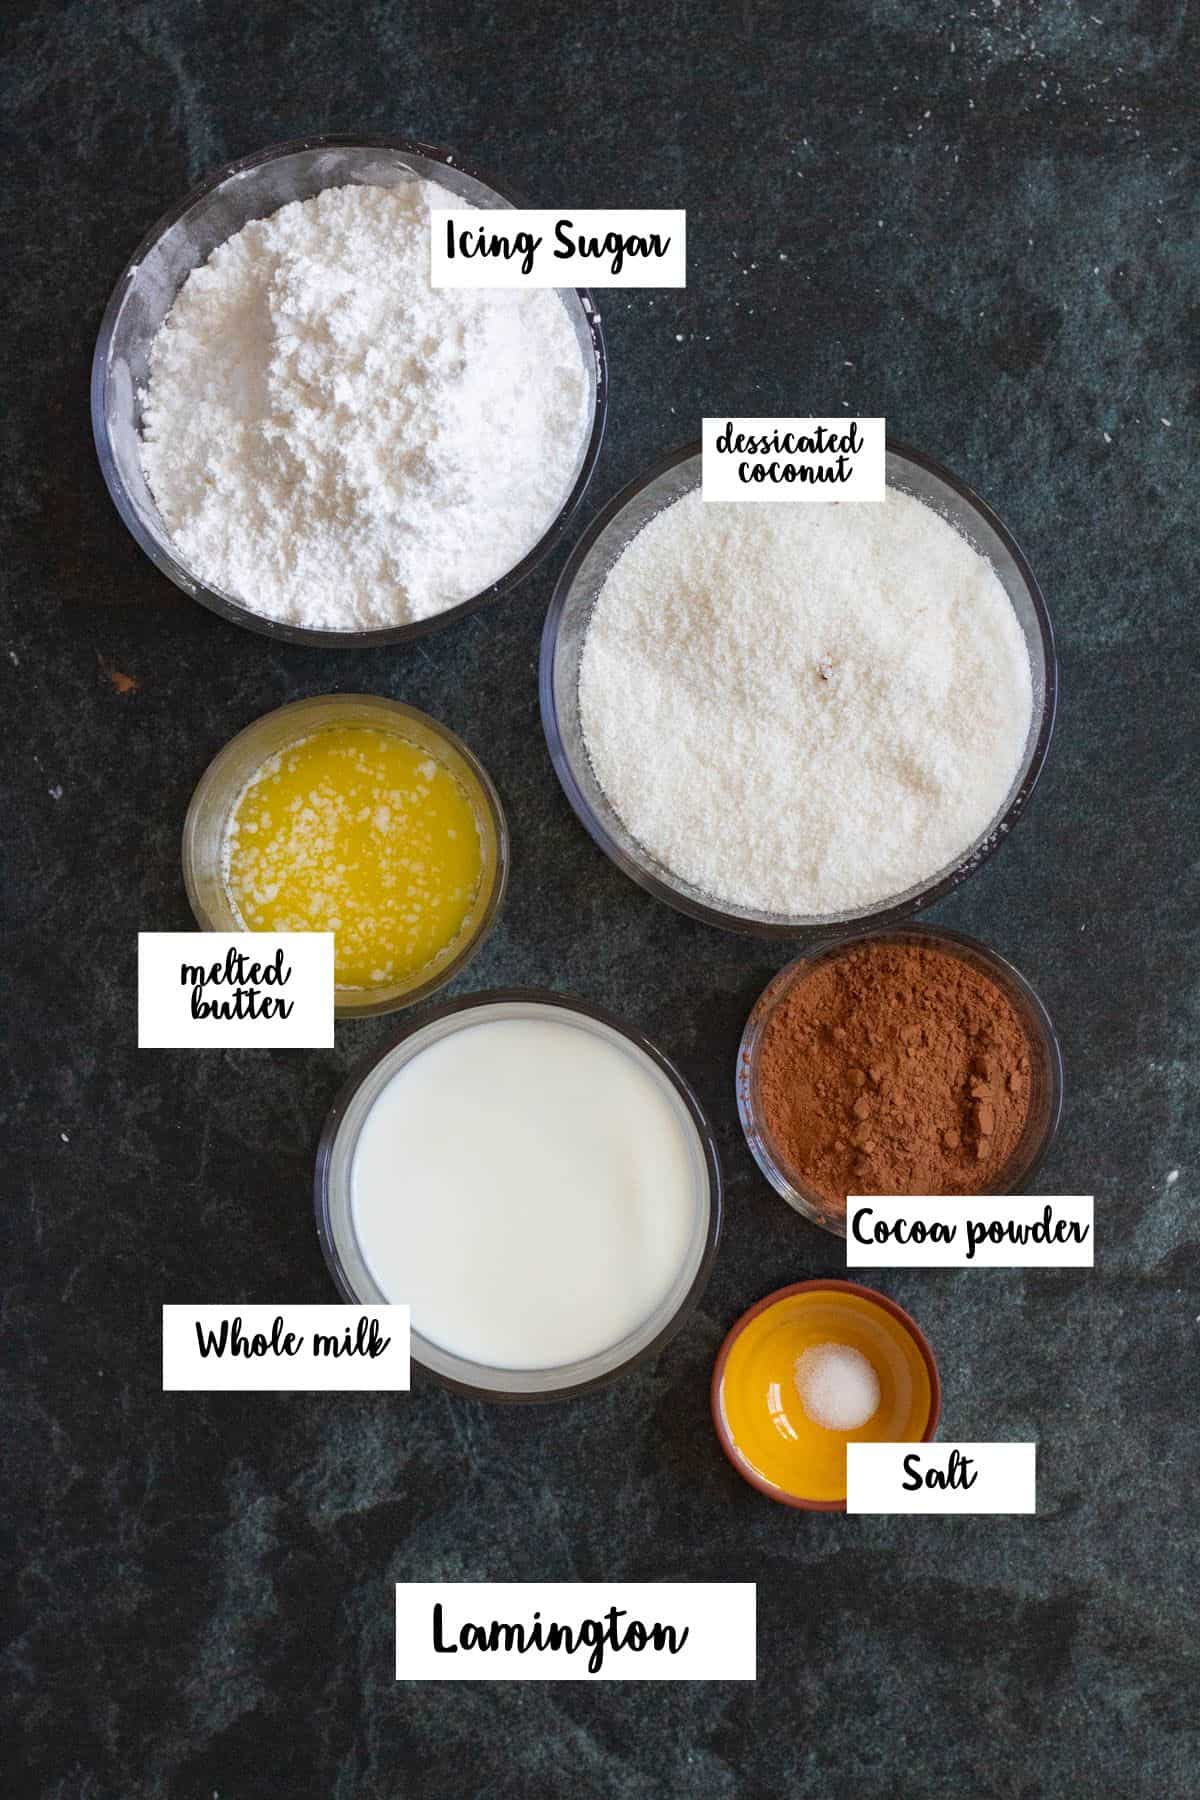 Ingredients shown are used to prepare Lamingtons. 